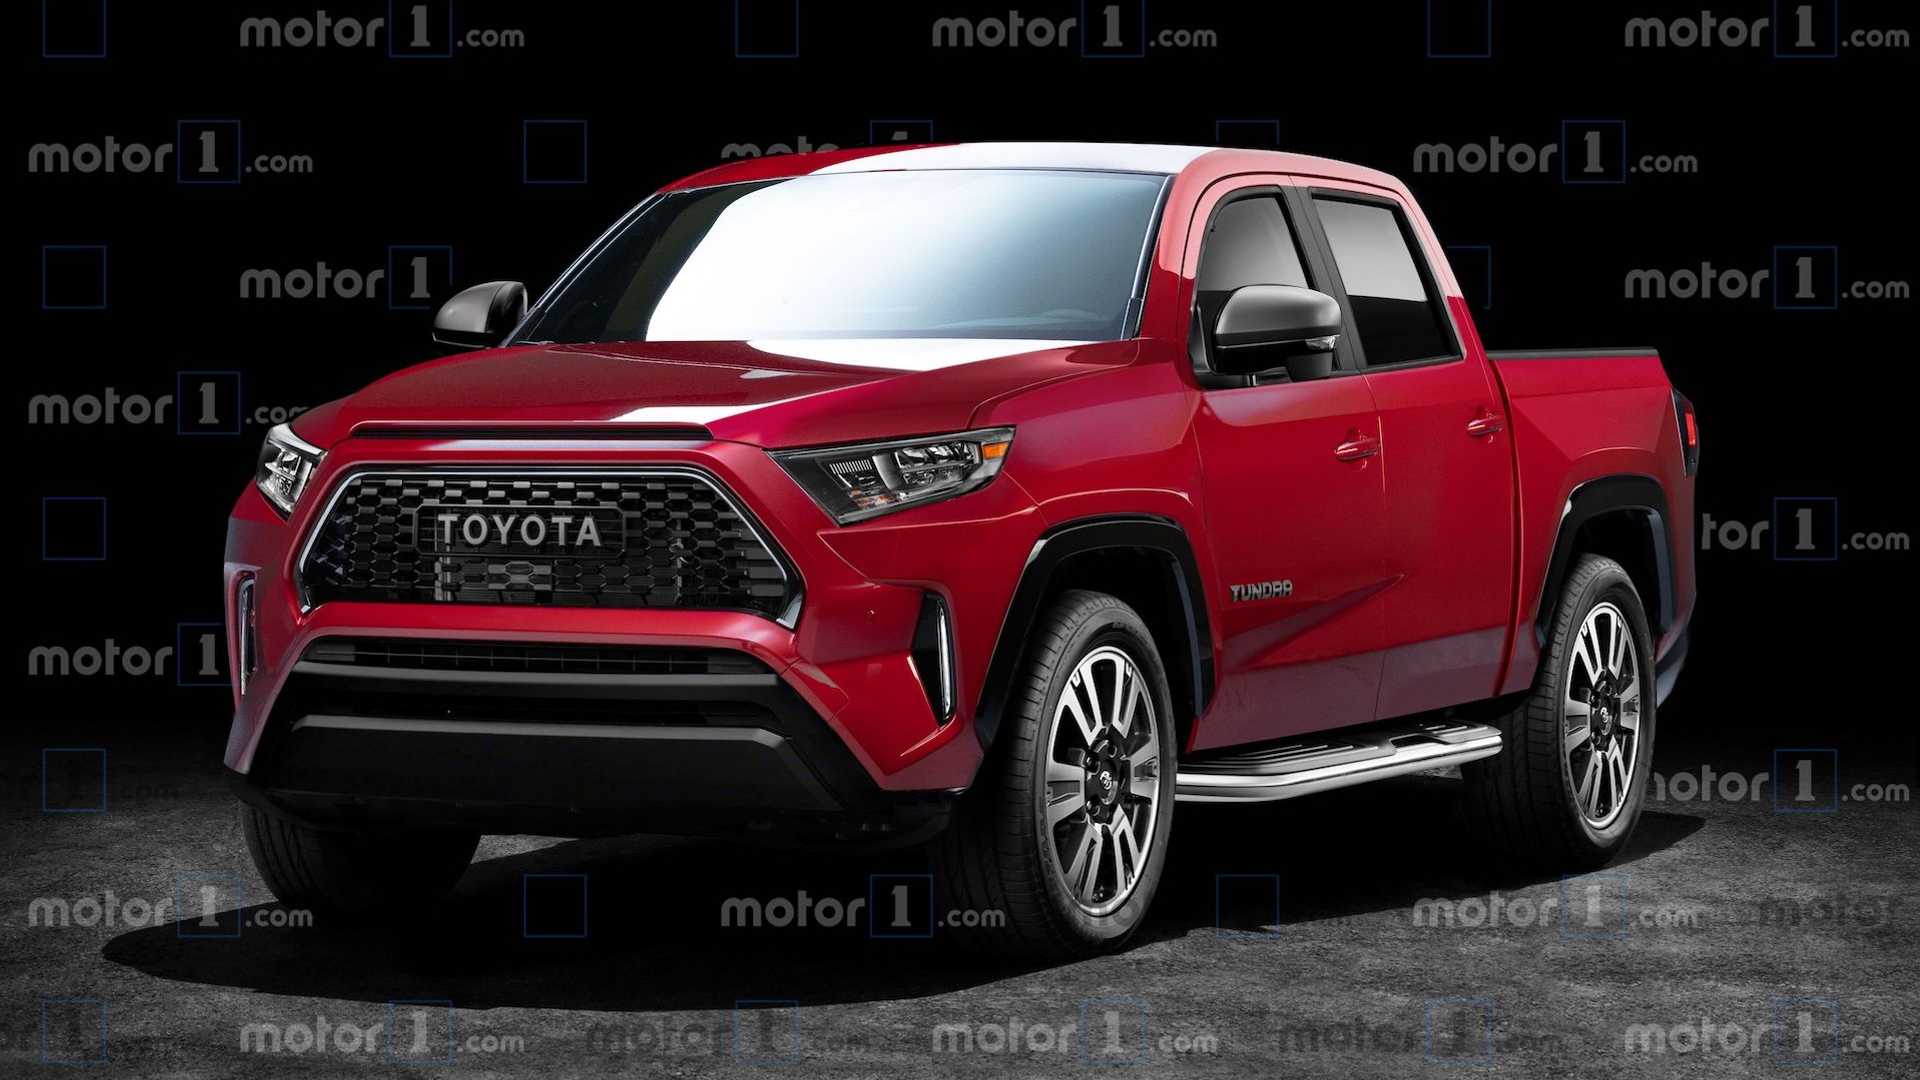 Here's What The Redesigned Toyota Tundra Might Look Like